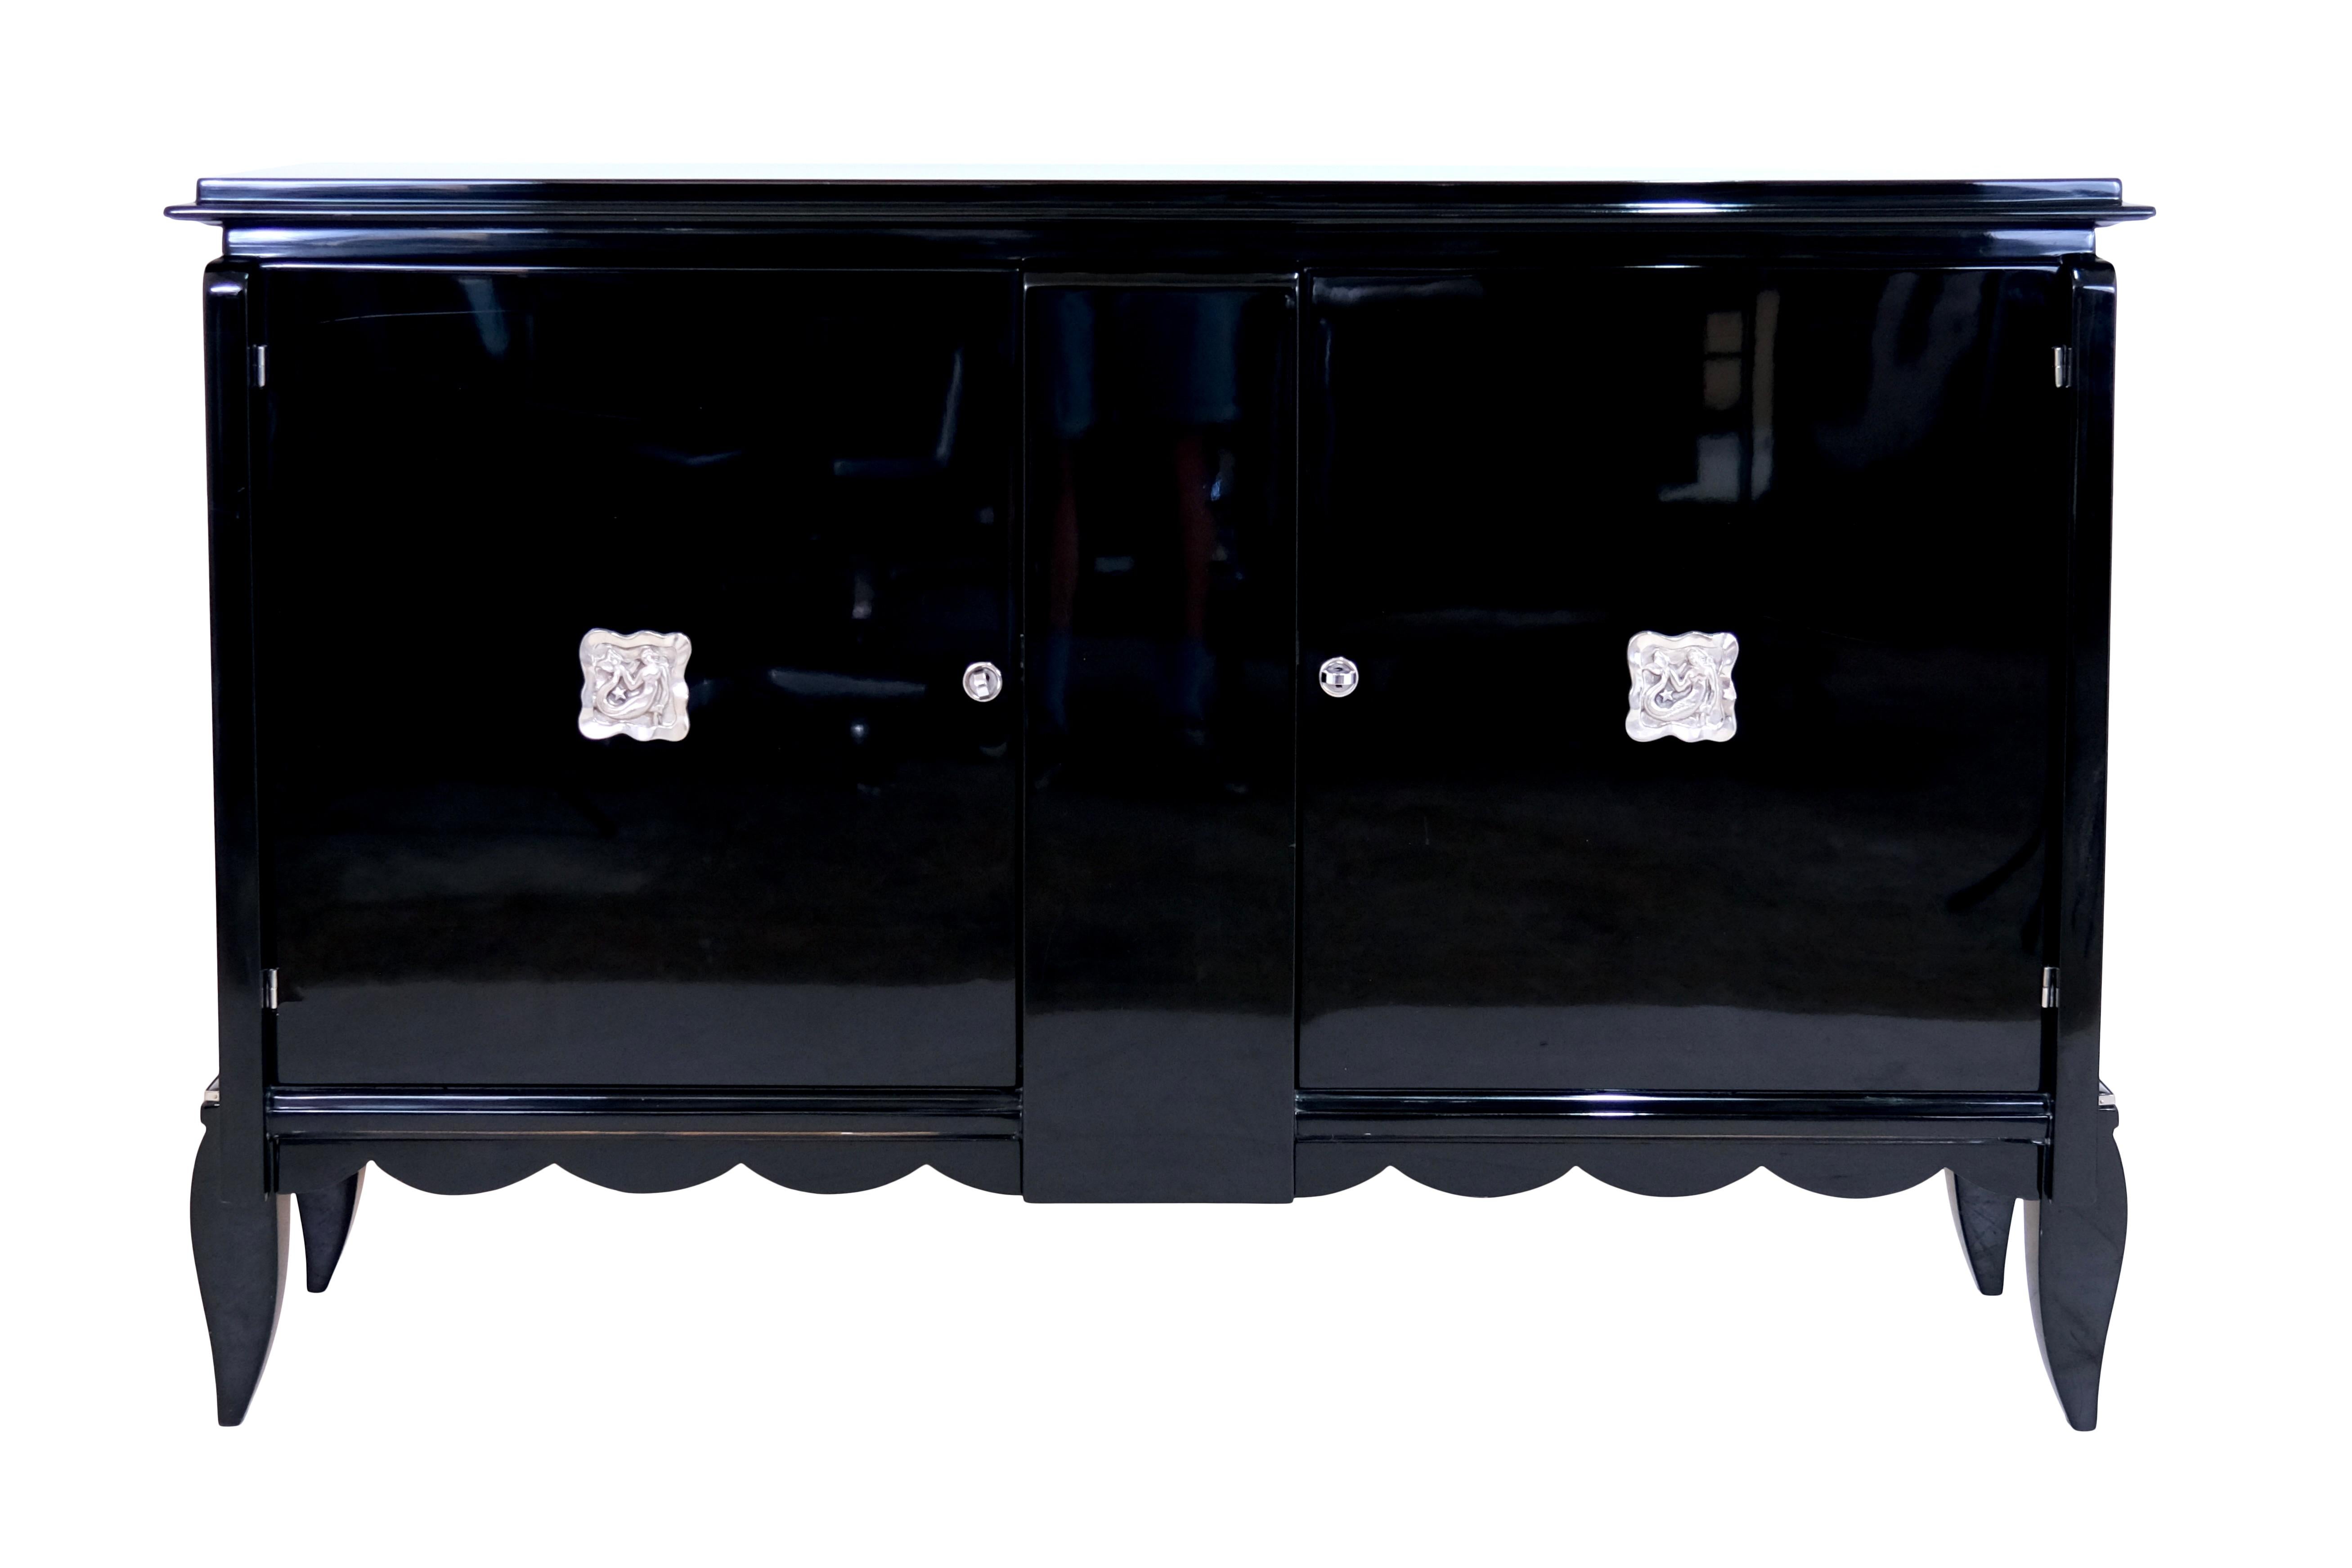 Sideboard in black lacquer with emblems

Sideboard with two doors
Piano lacquer, black high gloss
Chromed metal emblems

Original Art Deco, France 1930s

Dimensions:
Width: 144 cm
Height: 94,5 cm
Depth: 45 cm